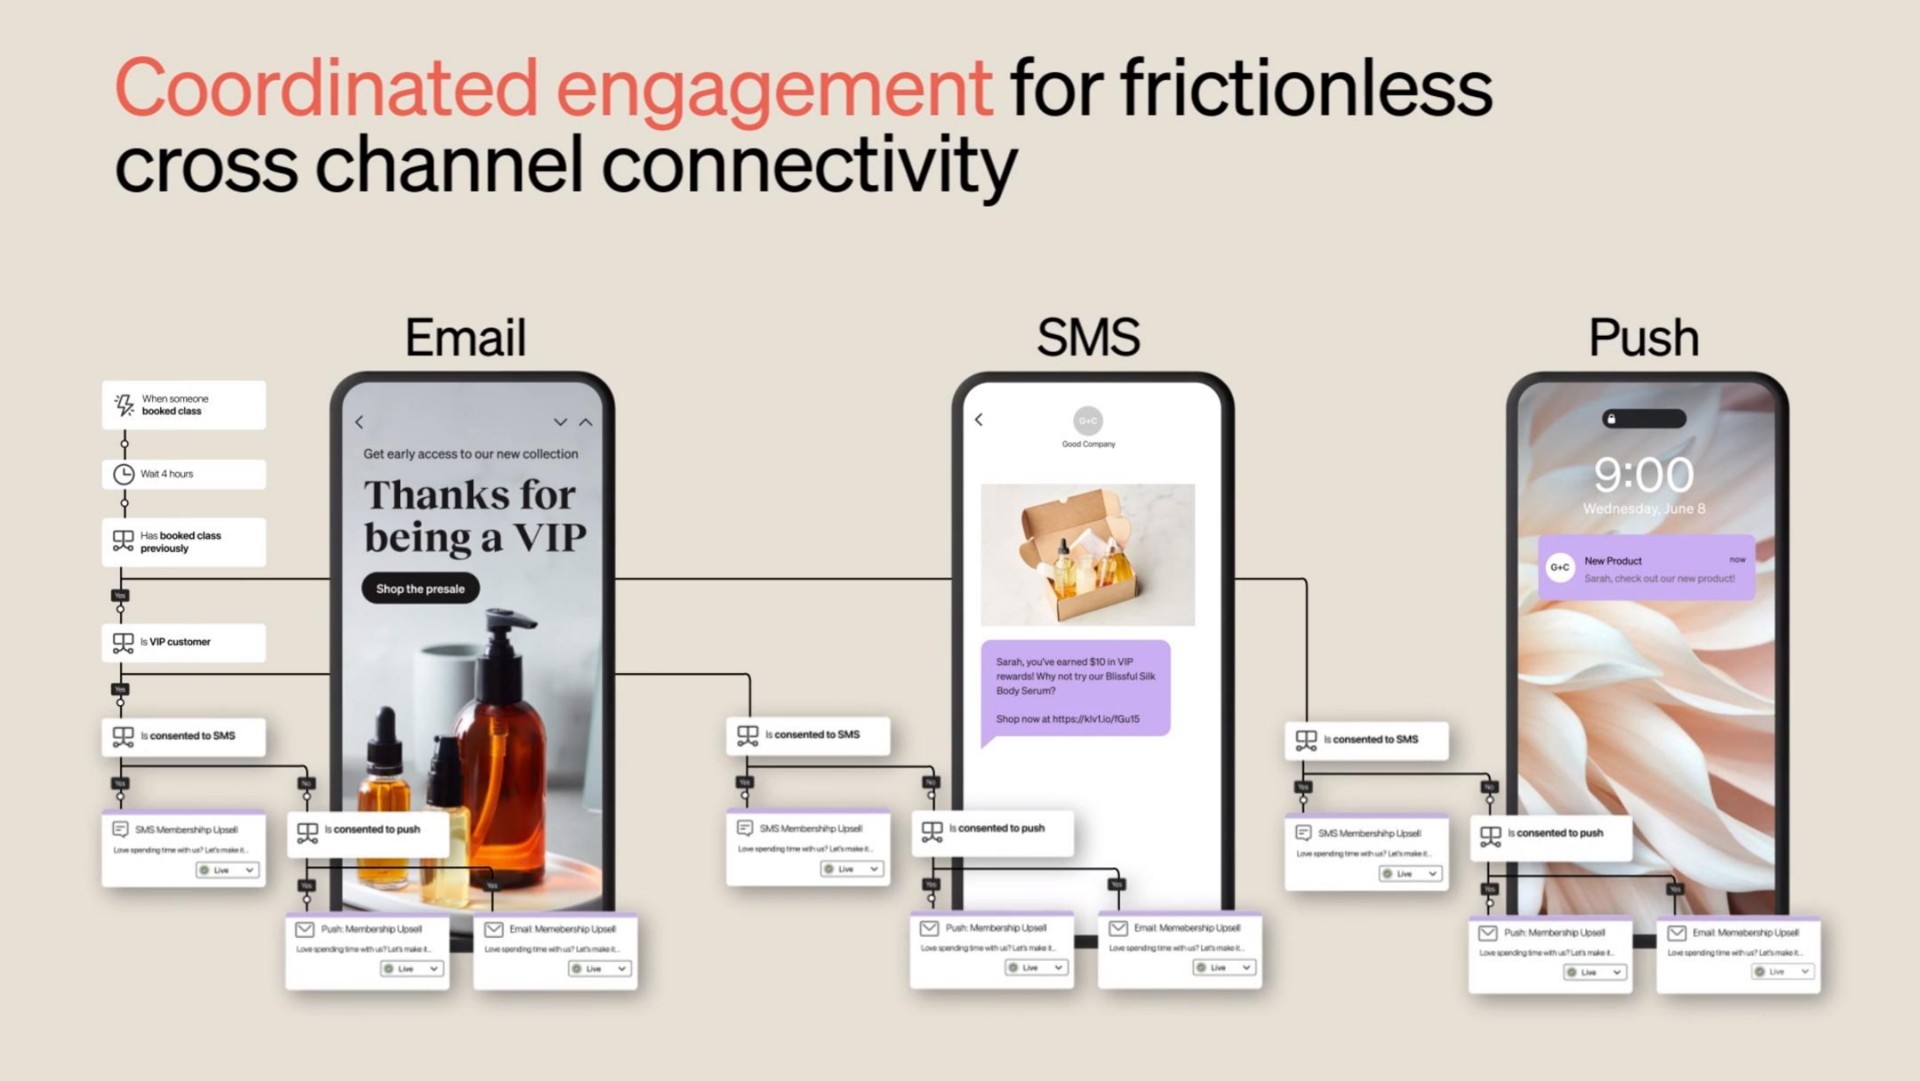 engagement for frictionless cross channel connectivity being a thanks for get early access to our new collection i consented to unset consent | Klaviyo